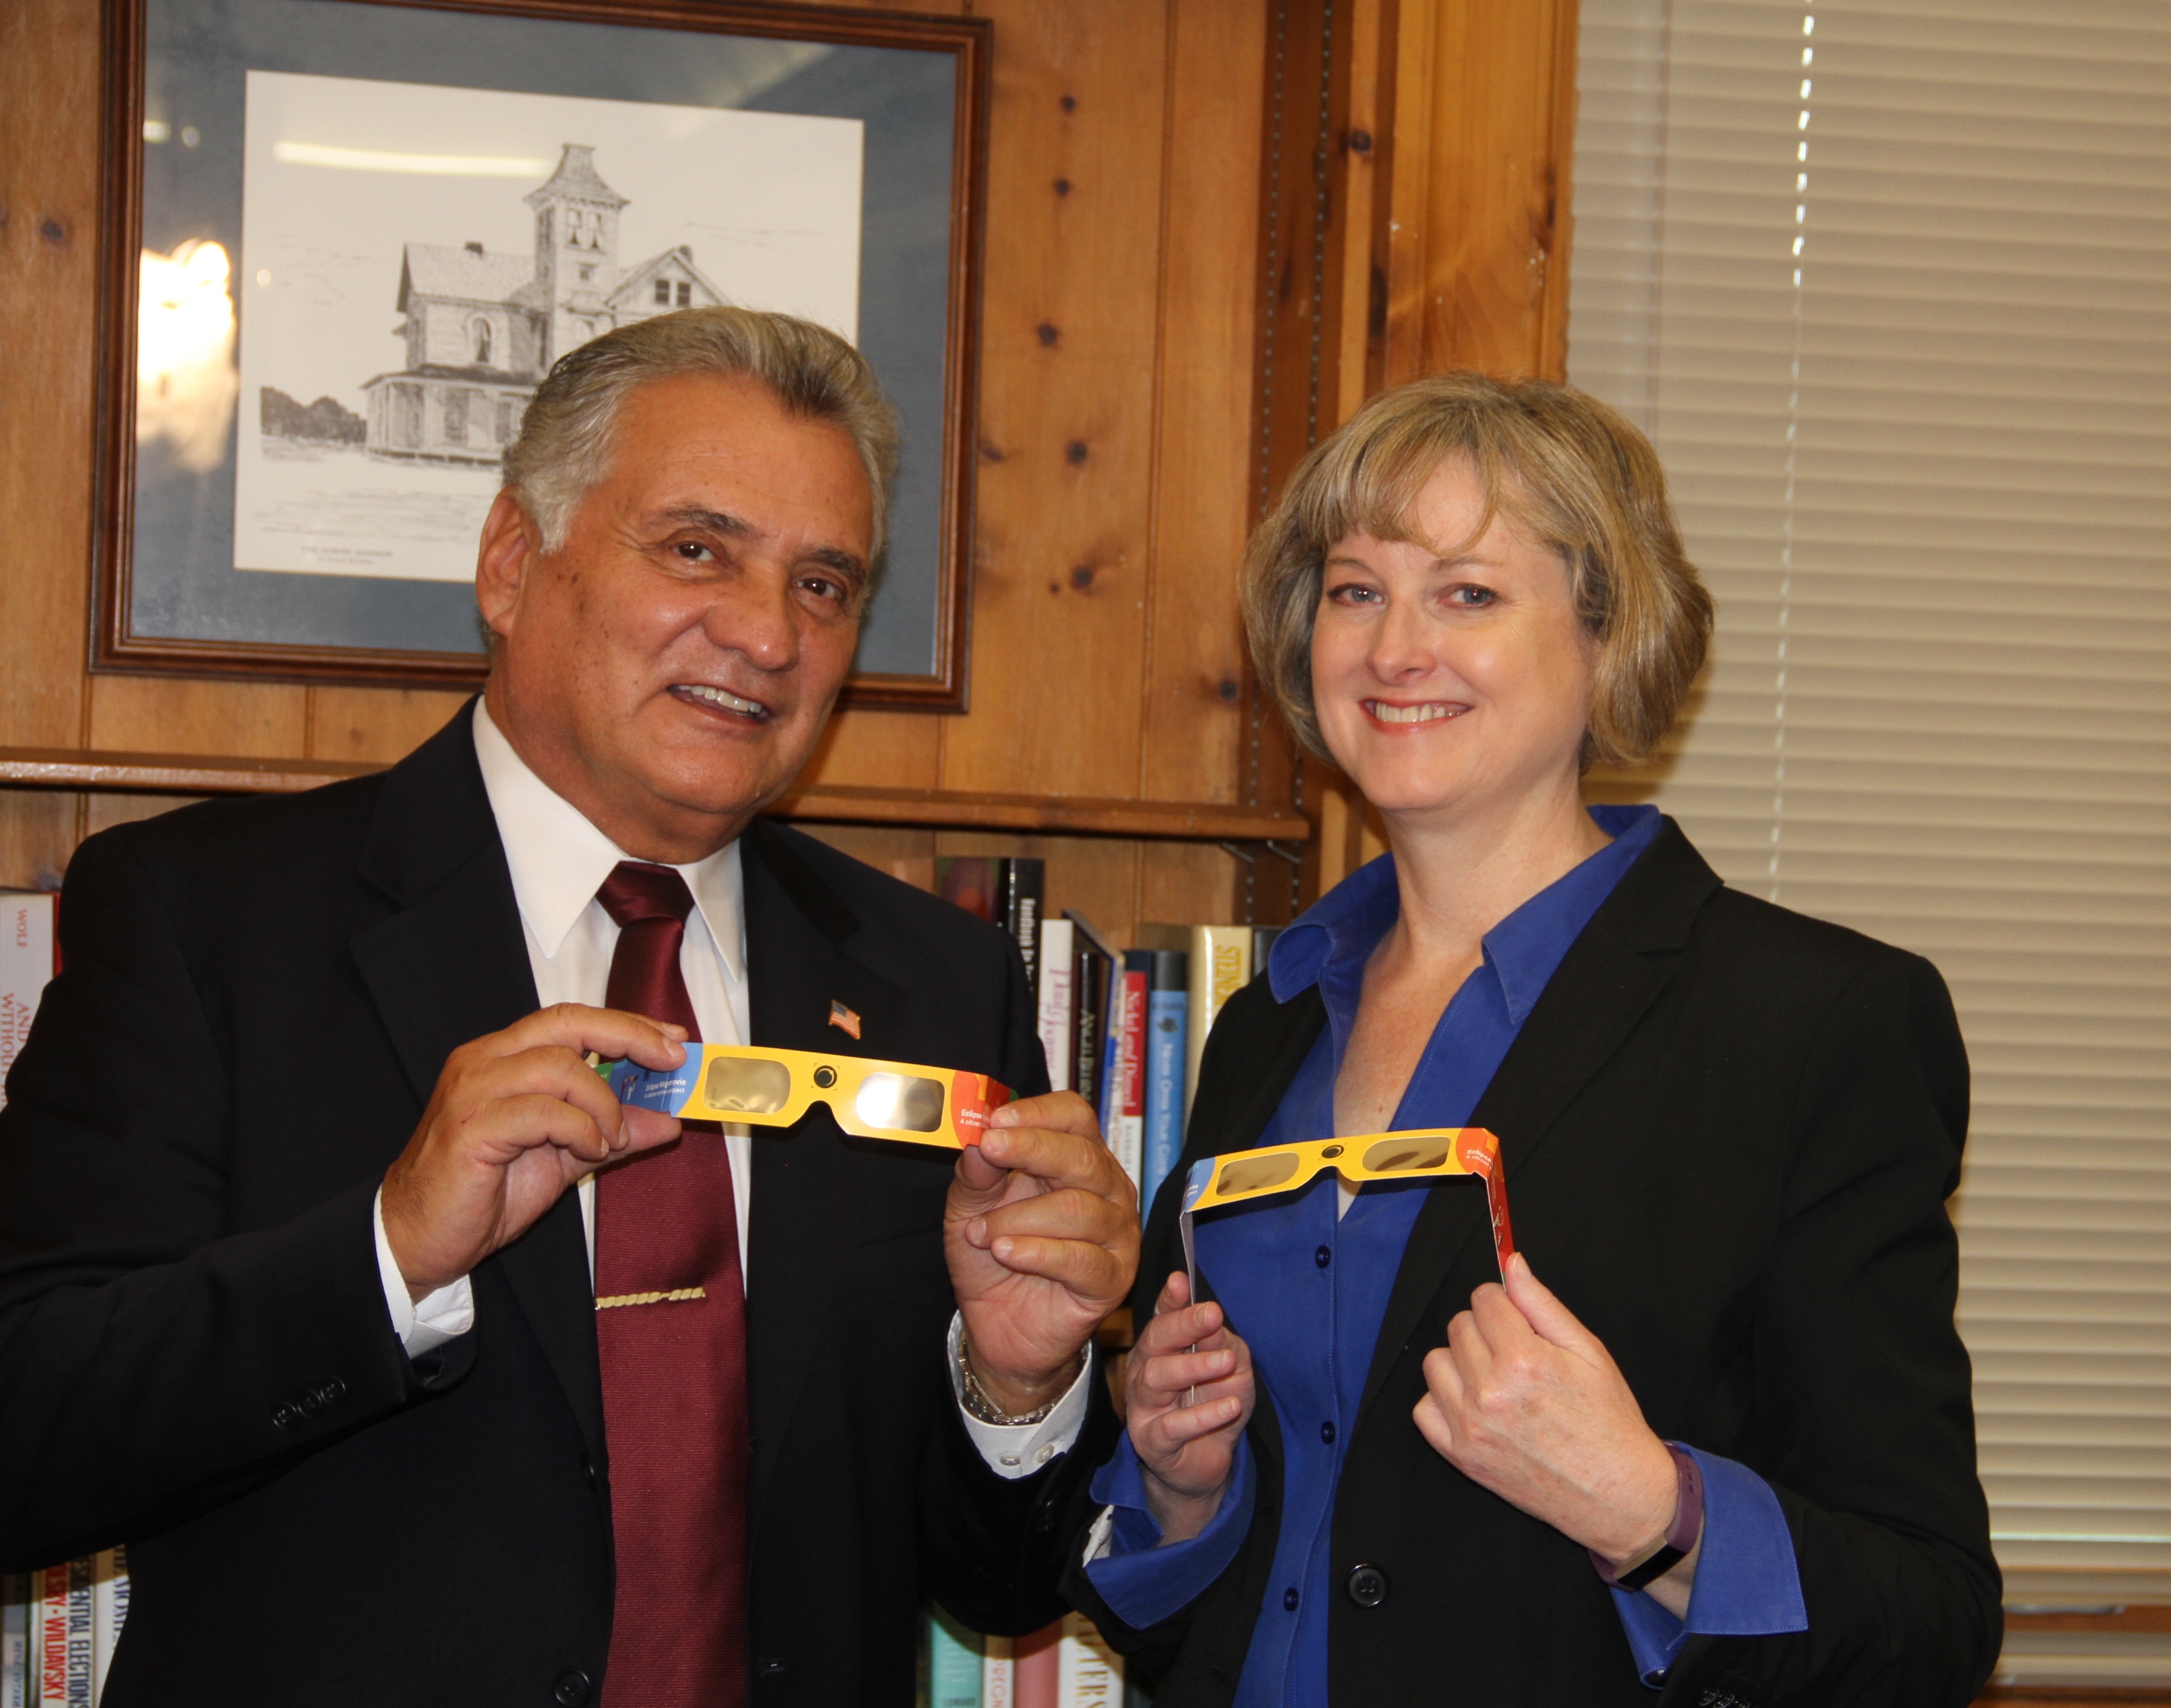 Ocean County Freeholder Director Joseph H. Vicari and Ocean County Library Director Susan Quinn check out the “Eclipse Shades” that were distributed by the Ocean County Library. (Photo: Ocean County)